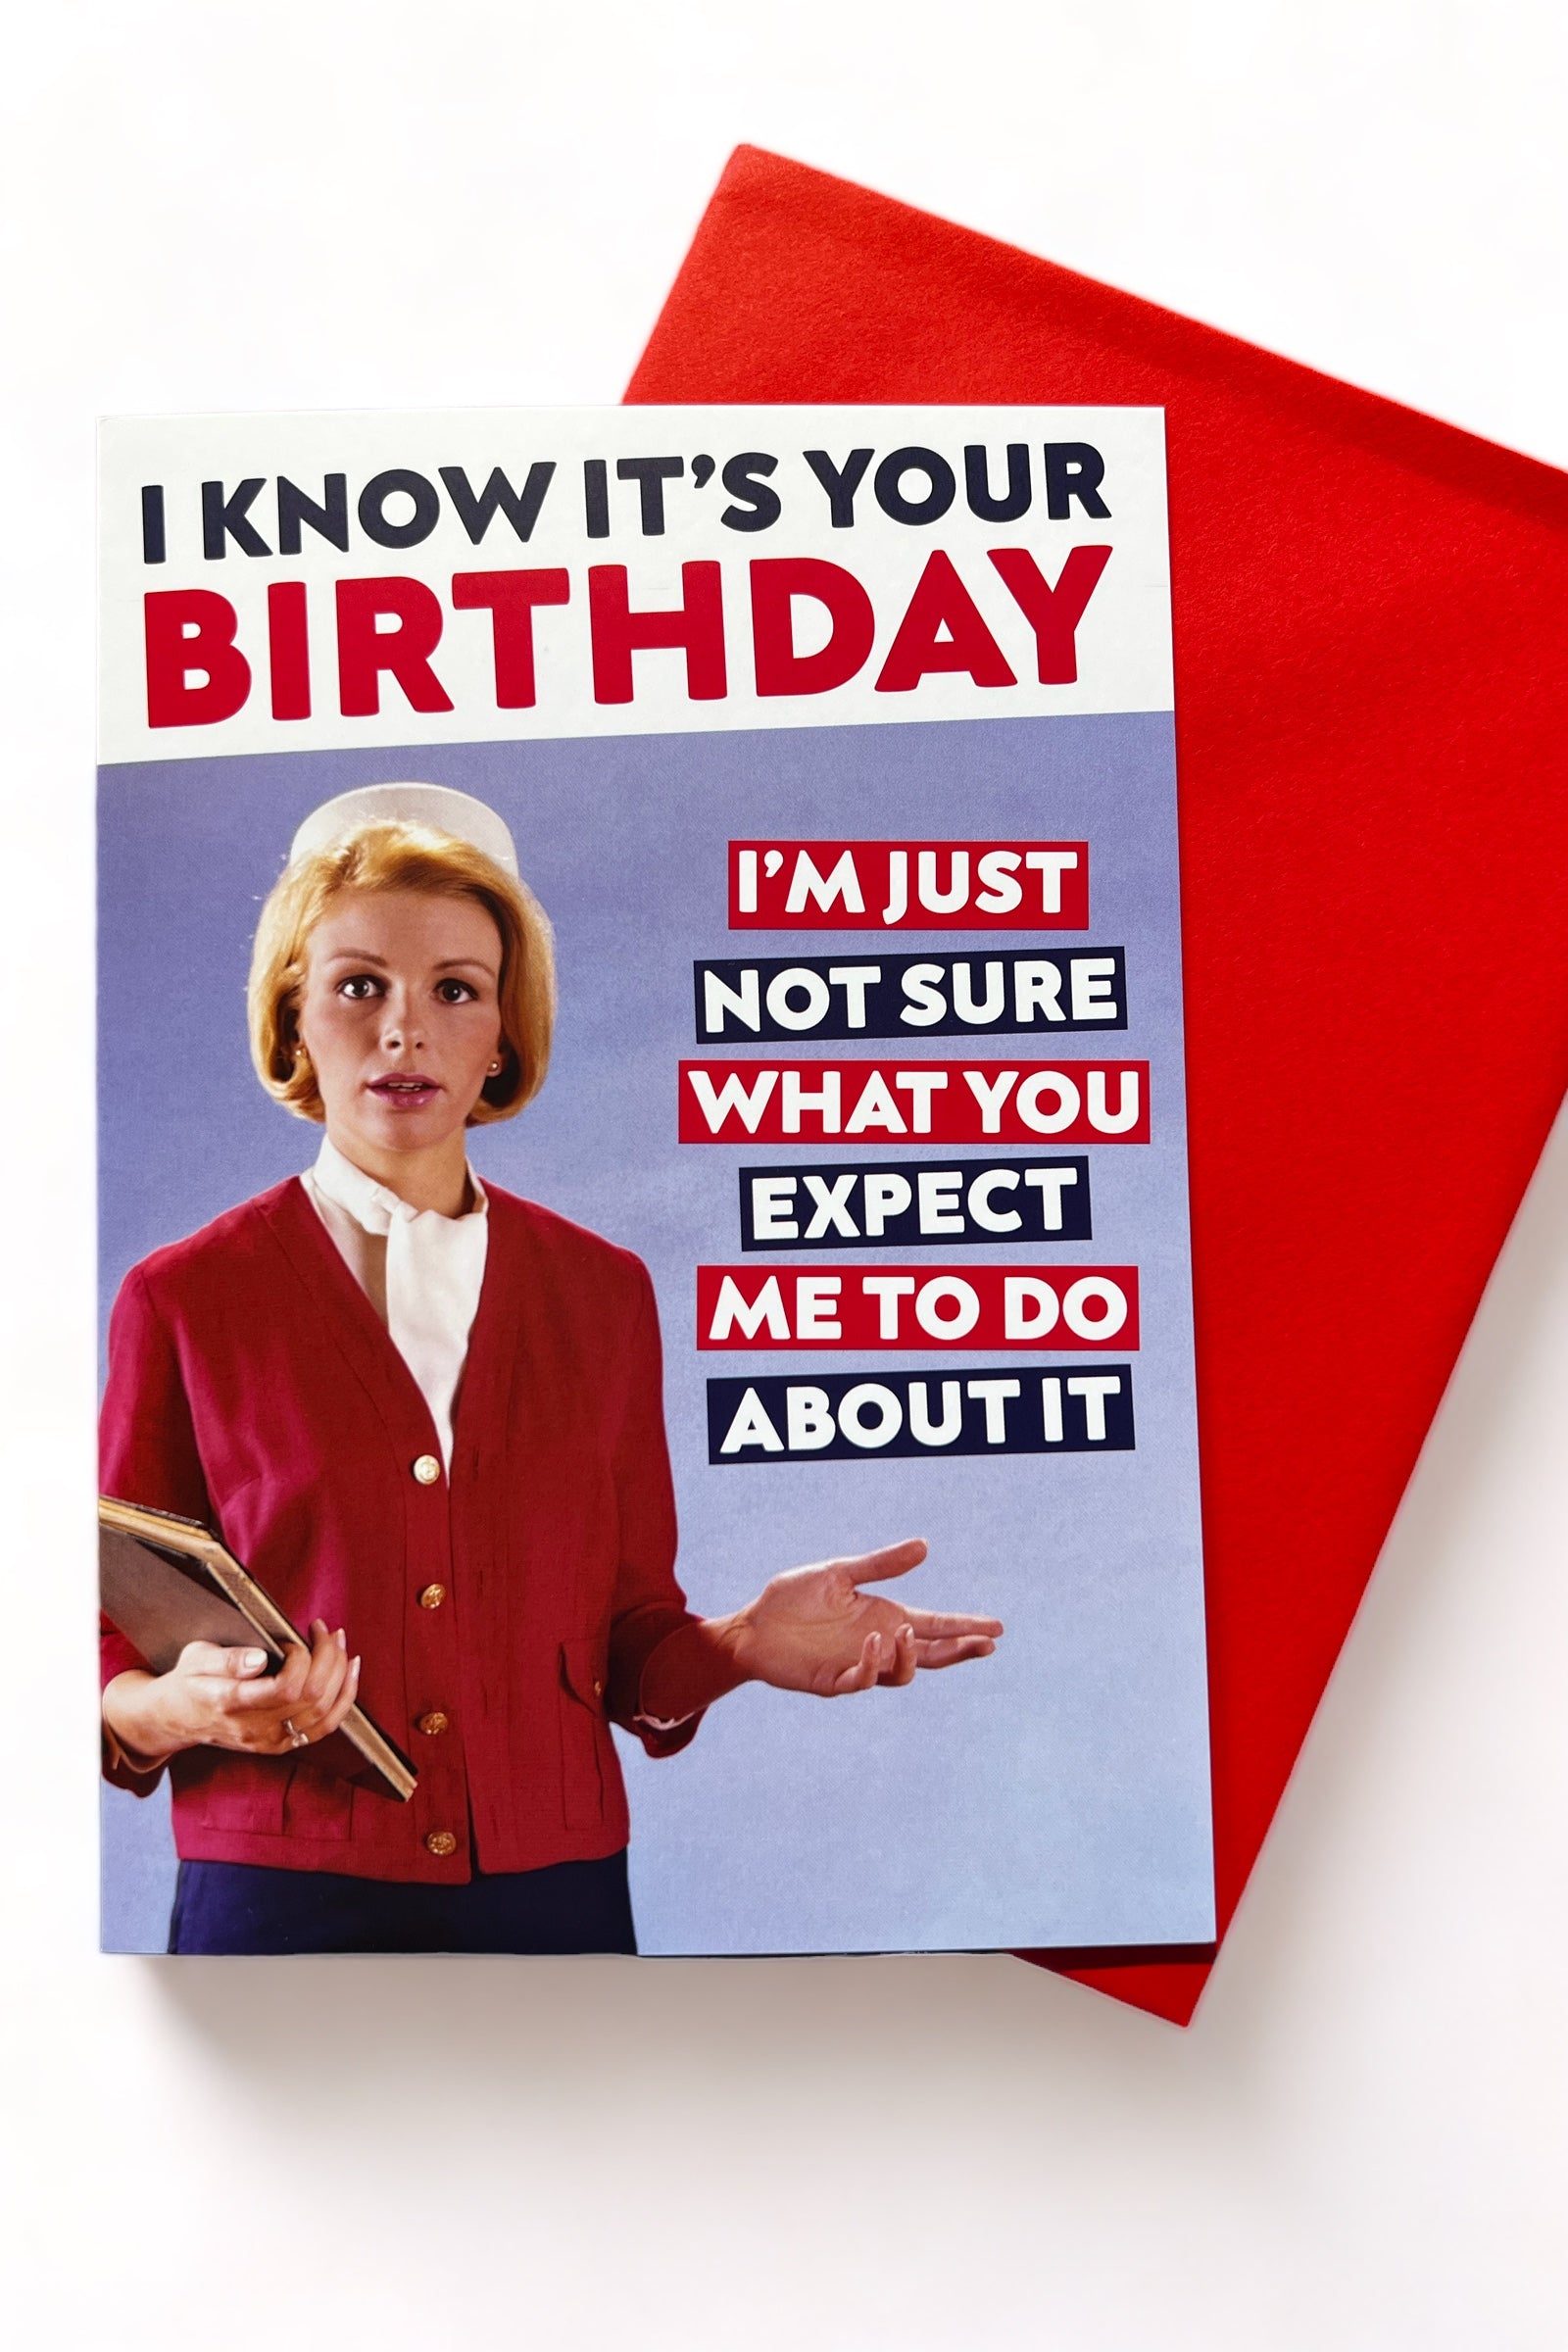 Birthday Card - You Say It's Your Birthday